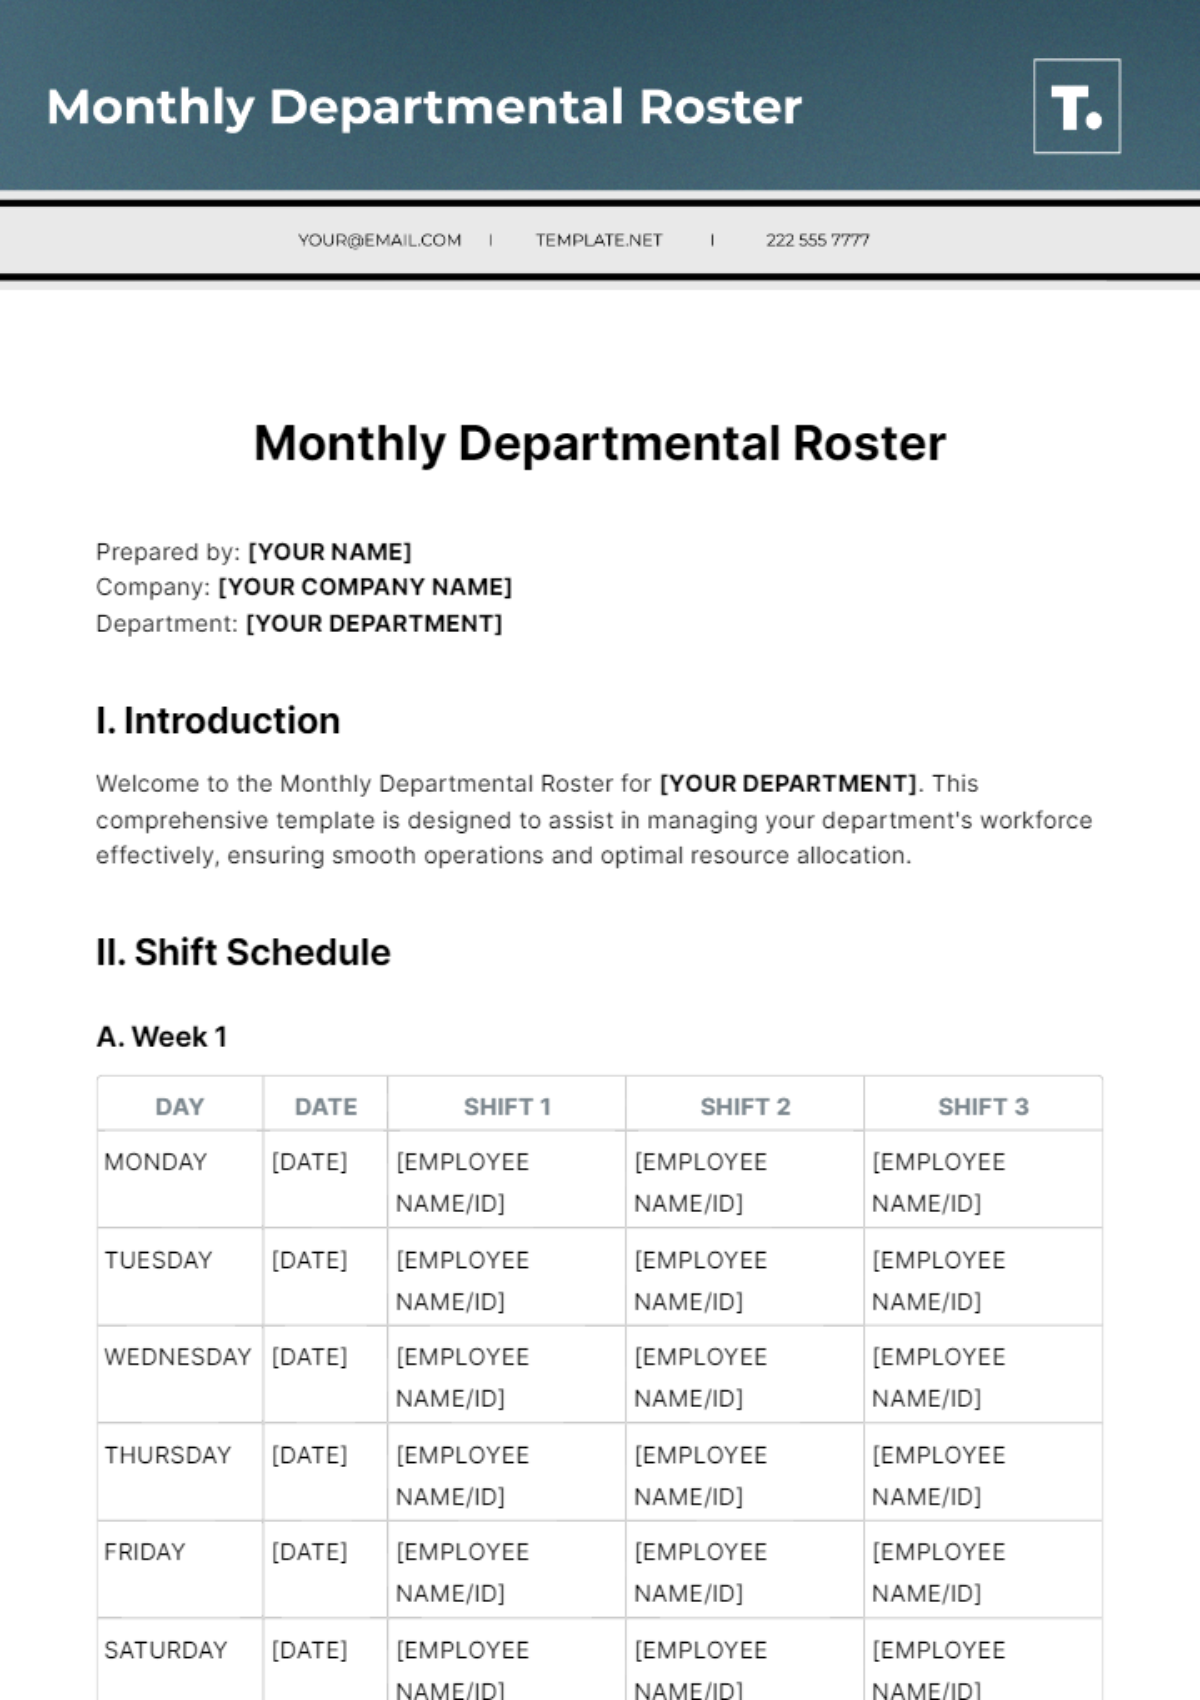 Monthly Departmental Roster Template